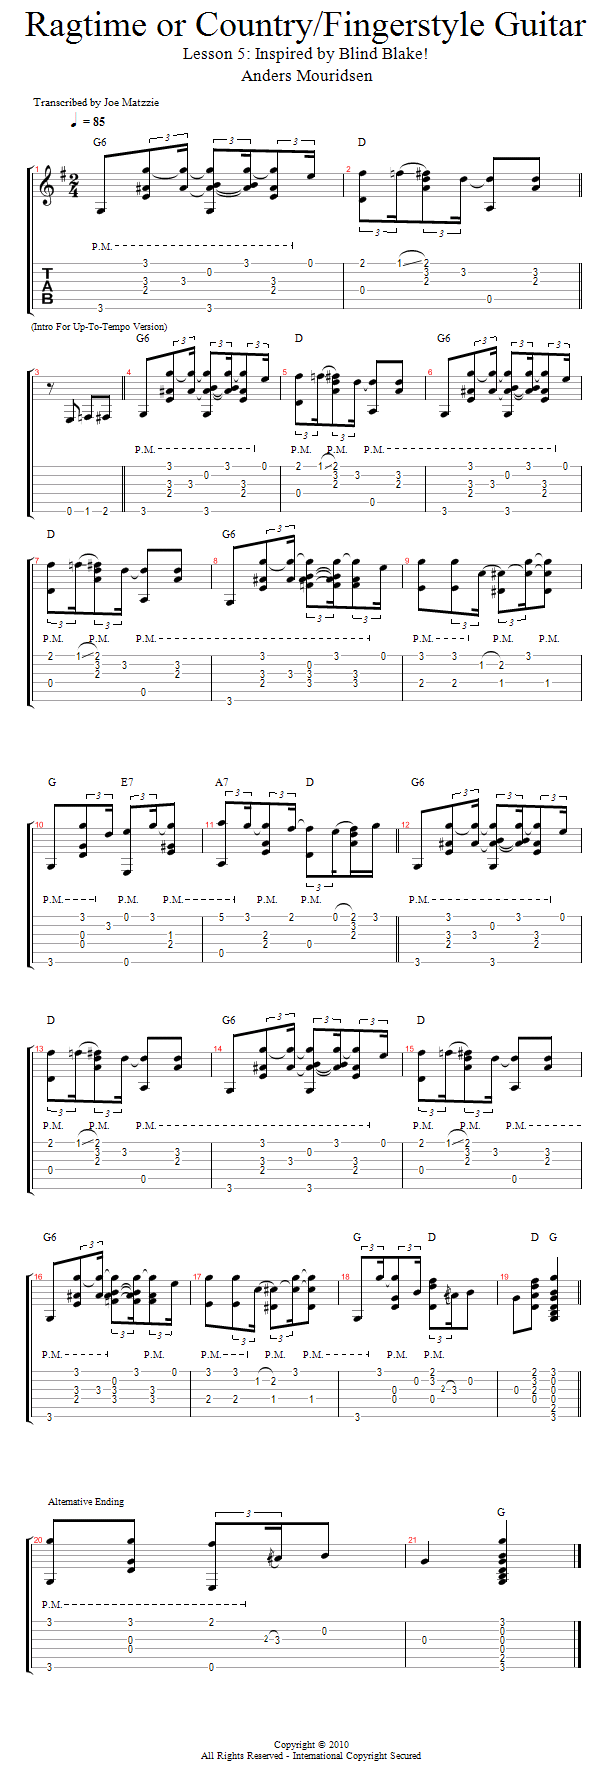 Inspired By Blind Blake song notation